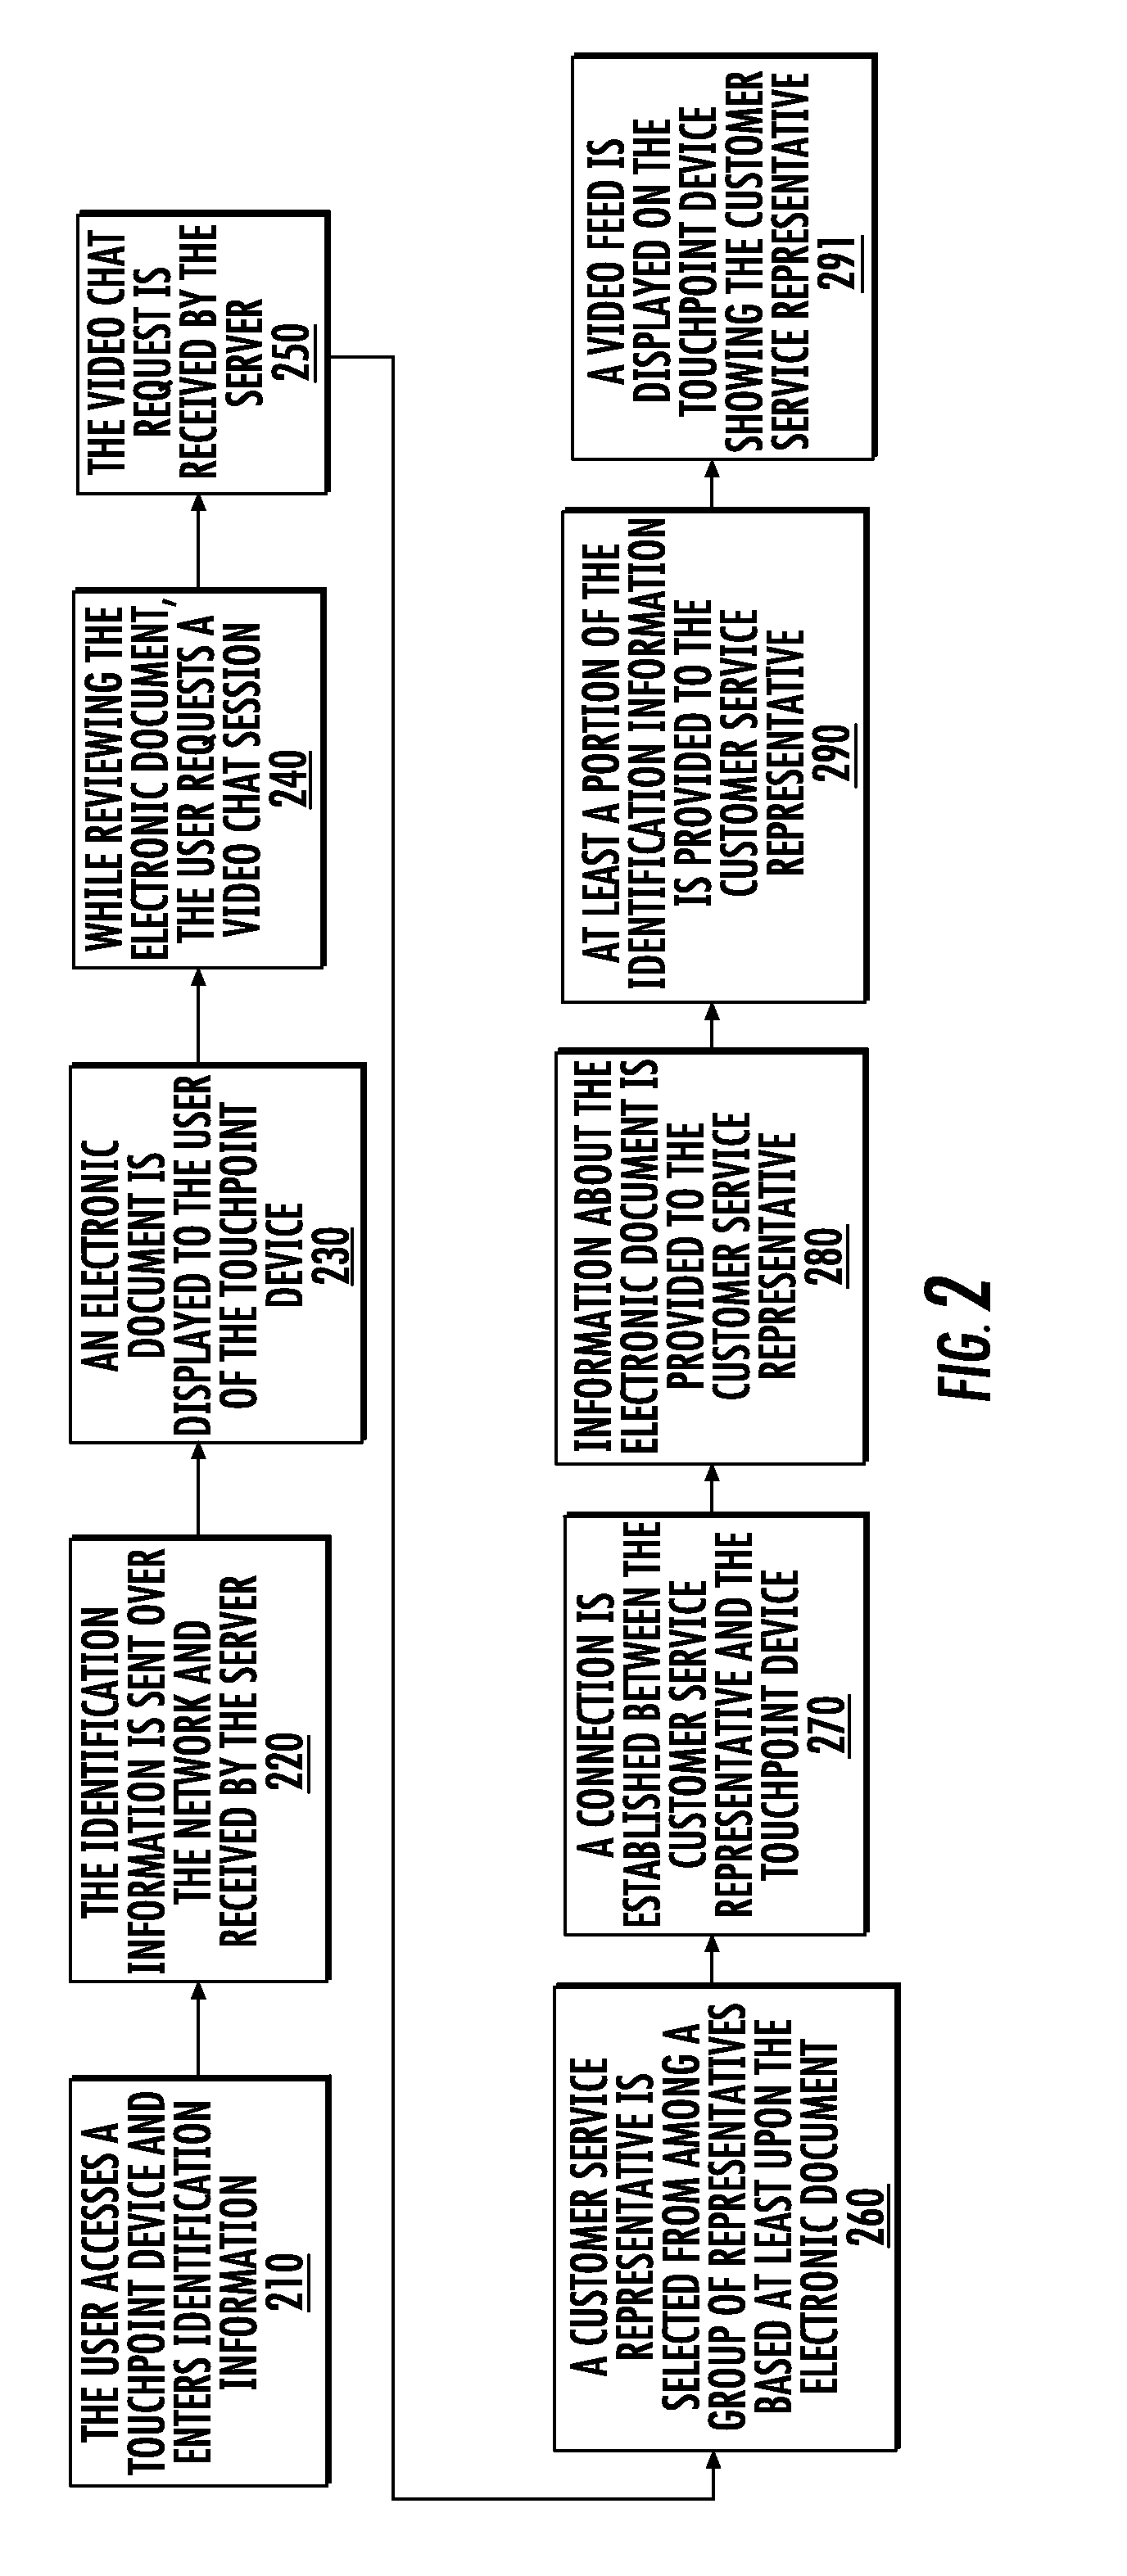 System and Method for Providing Customer Support on a User Interface